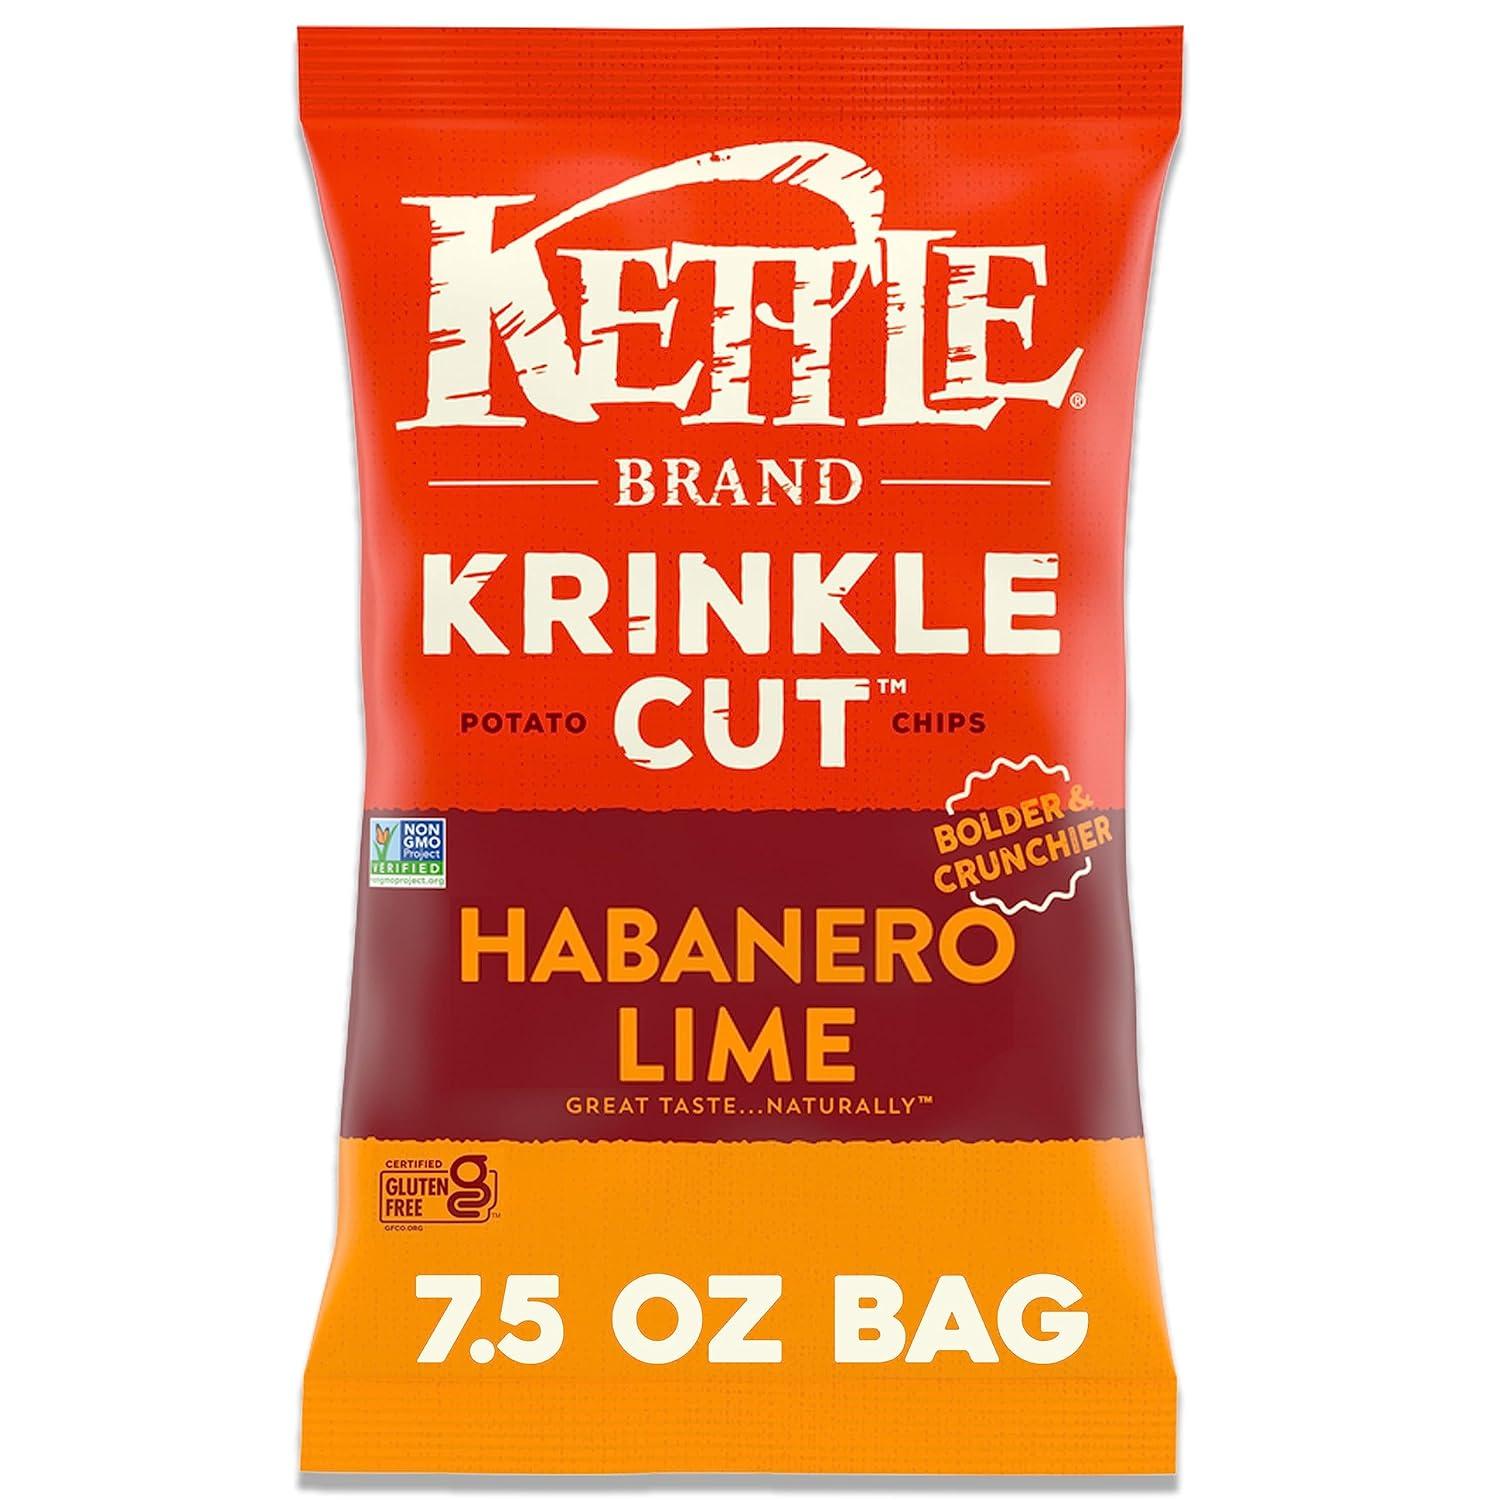 Kettle Brand Potato Chips Krinkle Cut Habanero Lime Kettle Chips for $3.39 Shipped